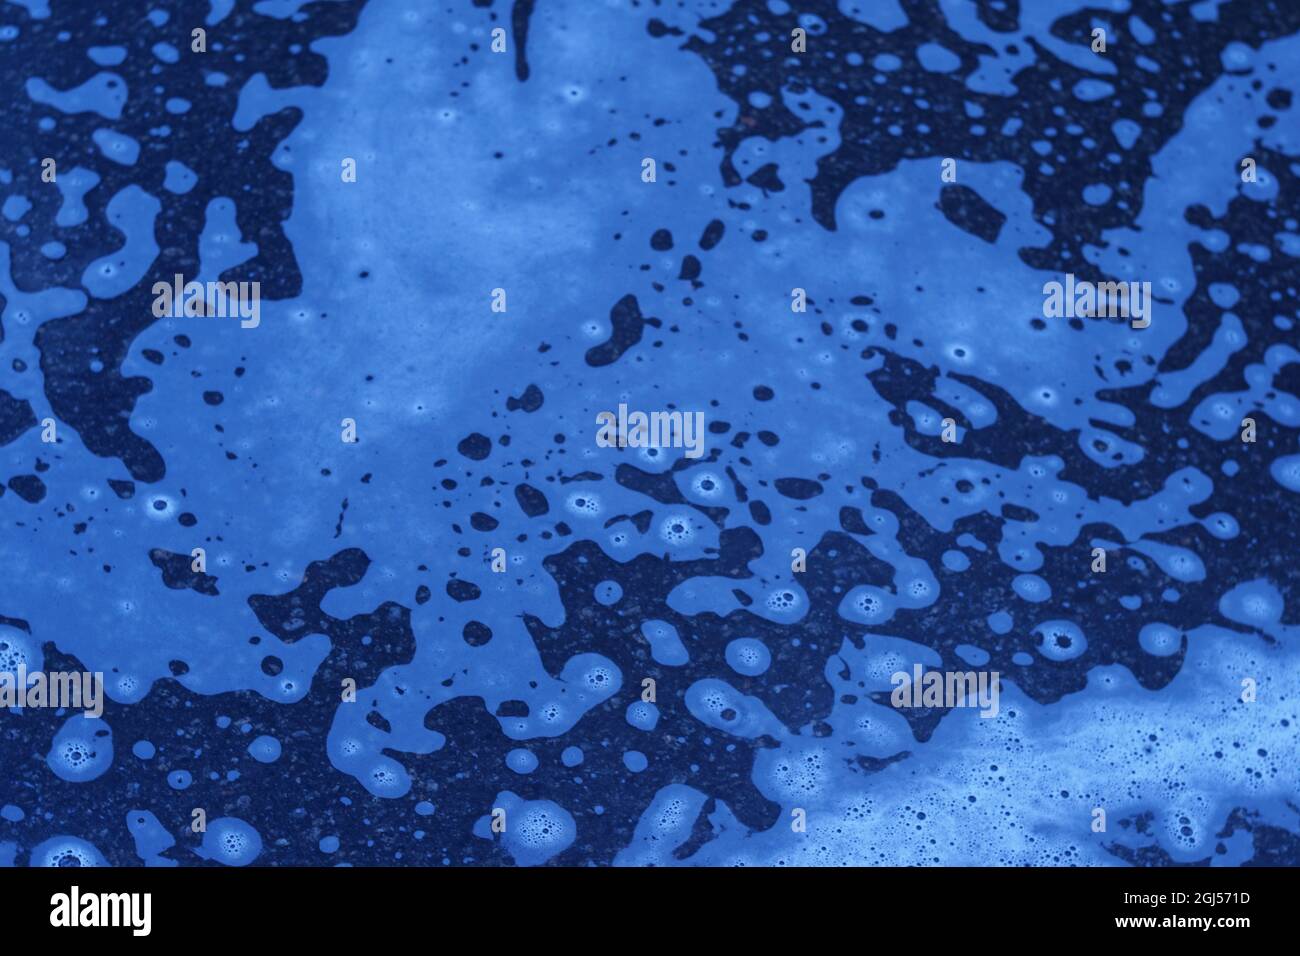 pattern of bubbles on surface of water Stock Photo - Alamy